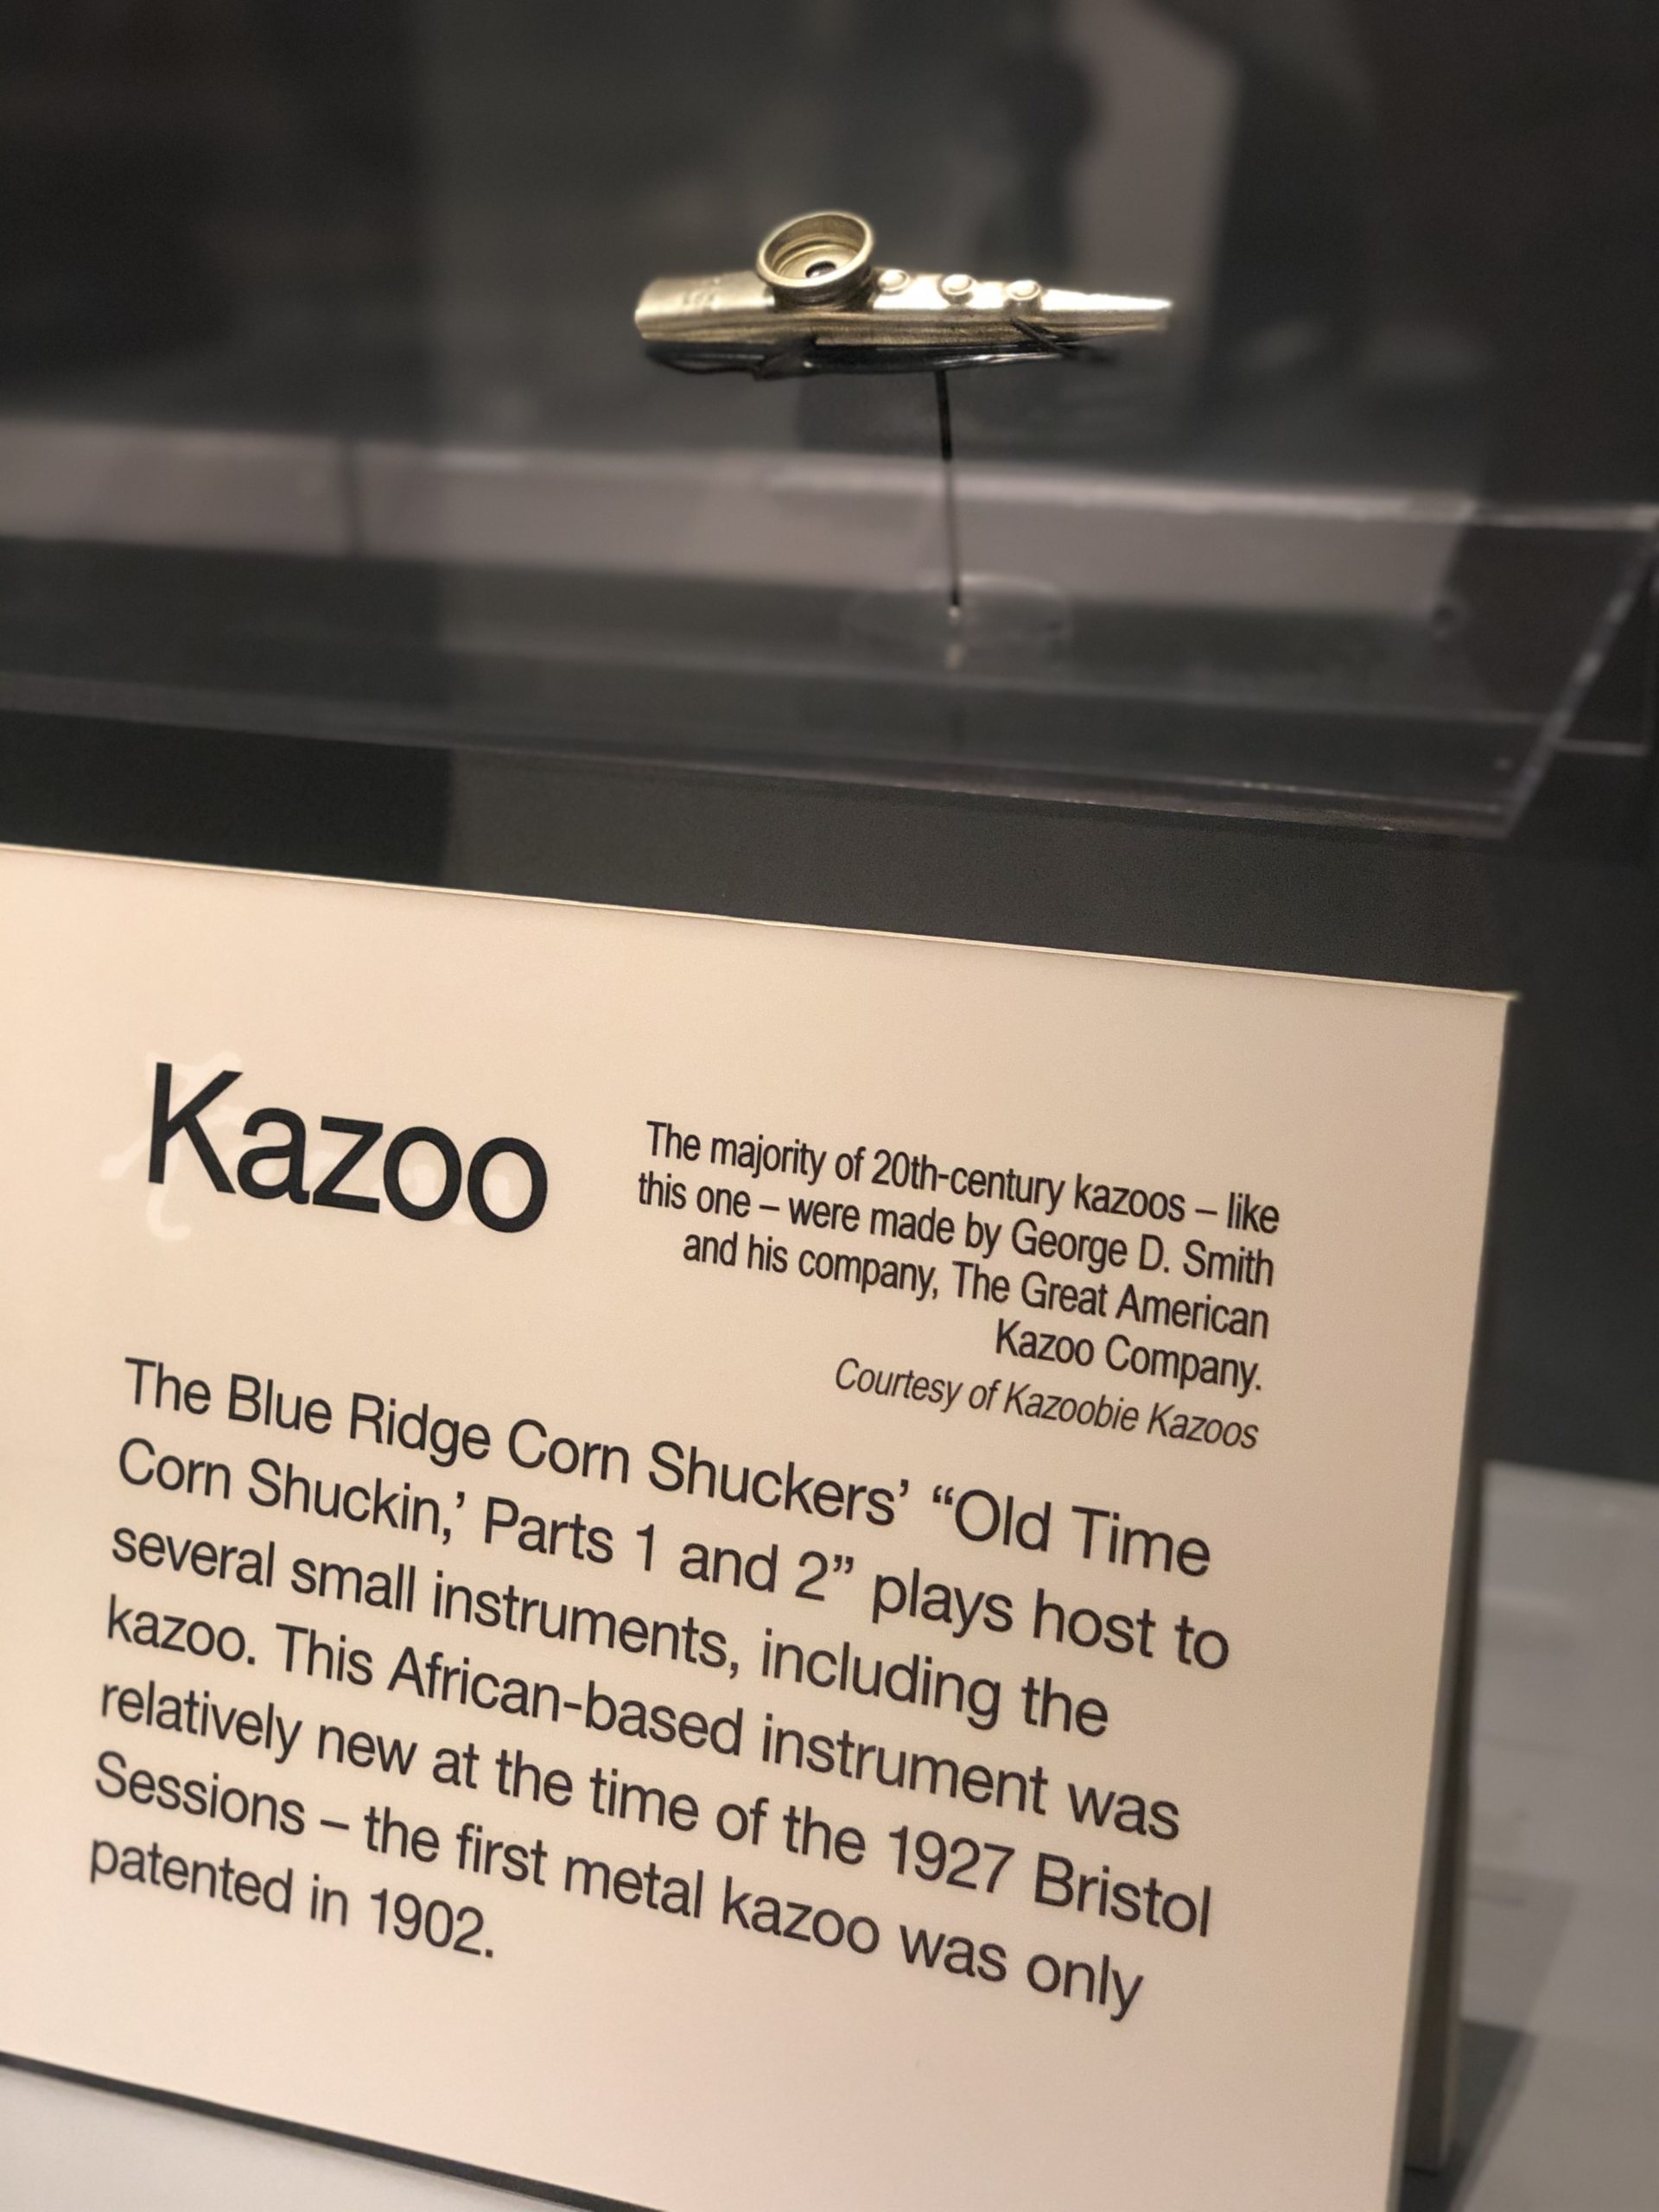 A metal kazoo on a display stand within a glass case with an interpretive label in front of it with a brief text about the kazoo.